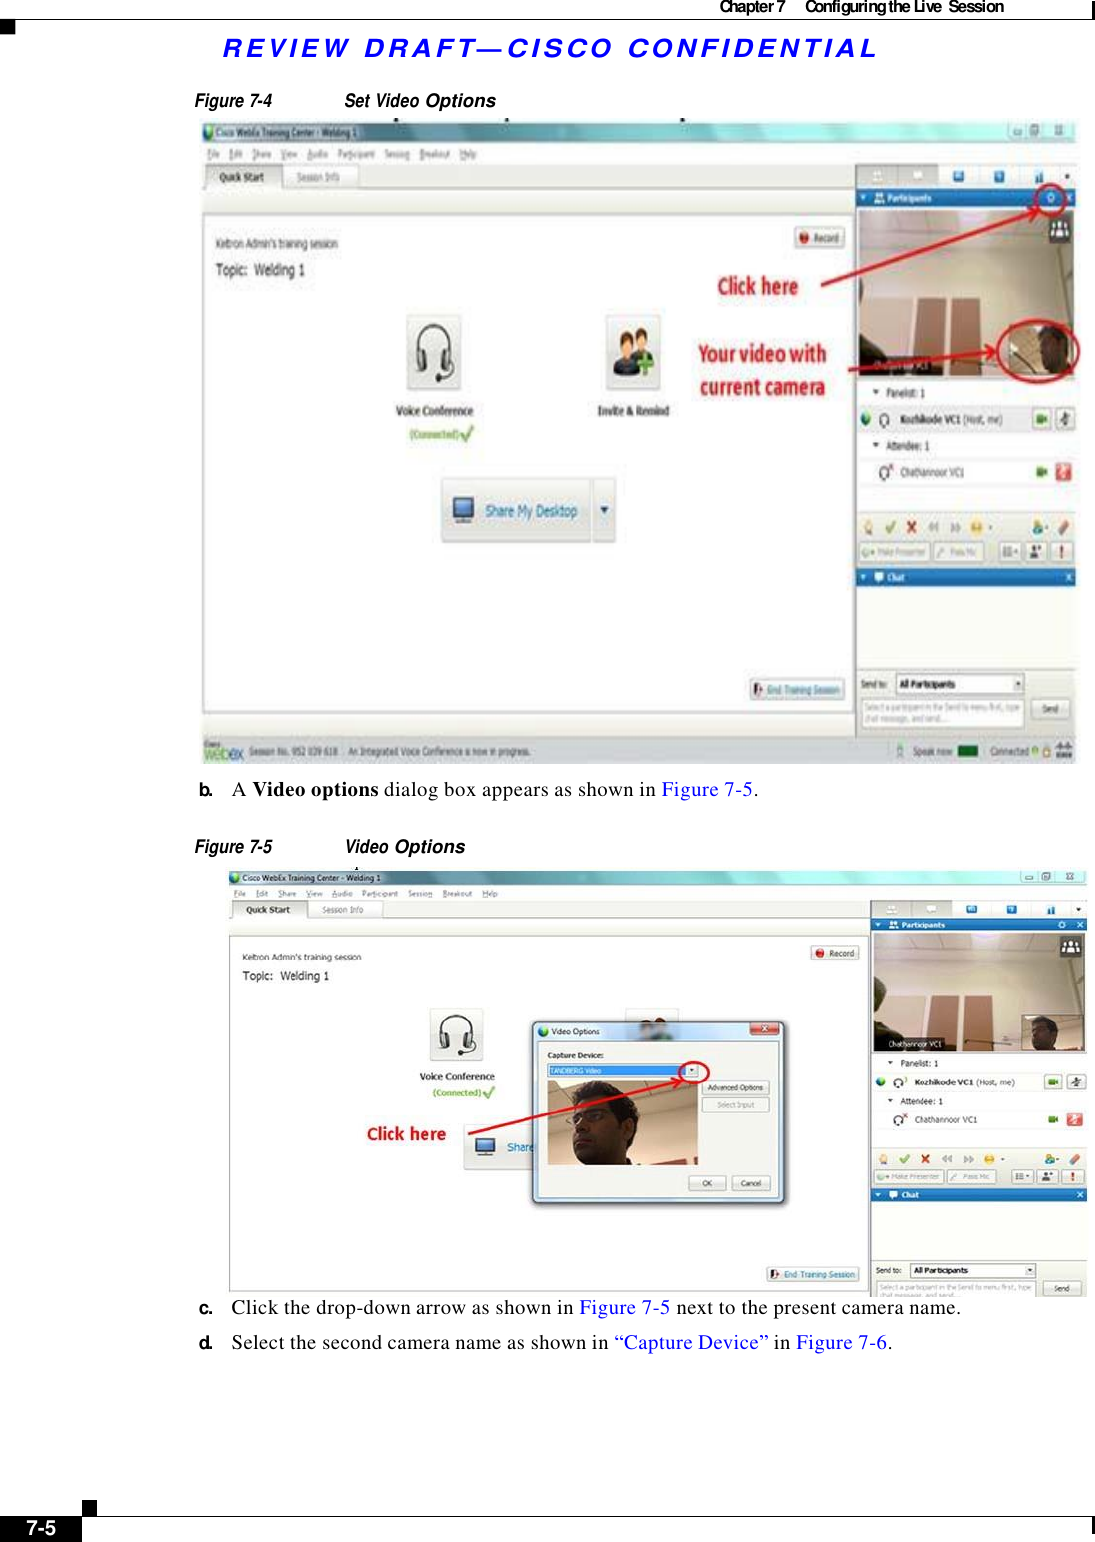 Chapter 7  Configuring the Live  Session  R E V I E W  DR AFT — CISC O  C O NF IDE N TIAL   Figure 7-4 Set Video Options   b.    A Video options dialog box appears as shown in Figure 7-5.   Figure 7-5 Video Options                      c.    Click the drop-down arrow as shown in Figure 7-5 next to the present camera name.  d.    Select the second camera name as shown in “Capture Device” in Figure 7-6.           7-5    